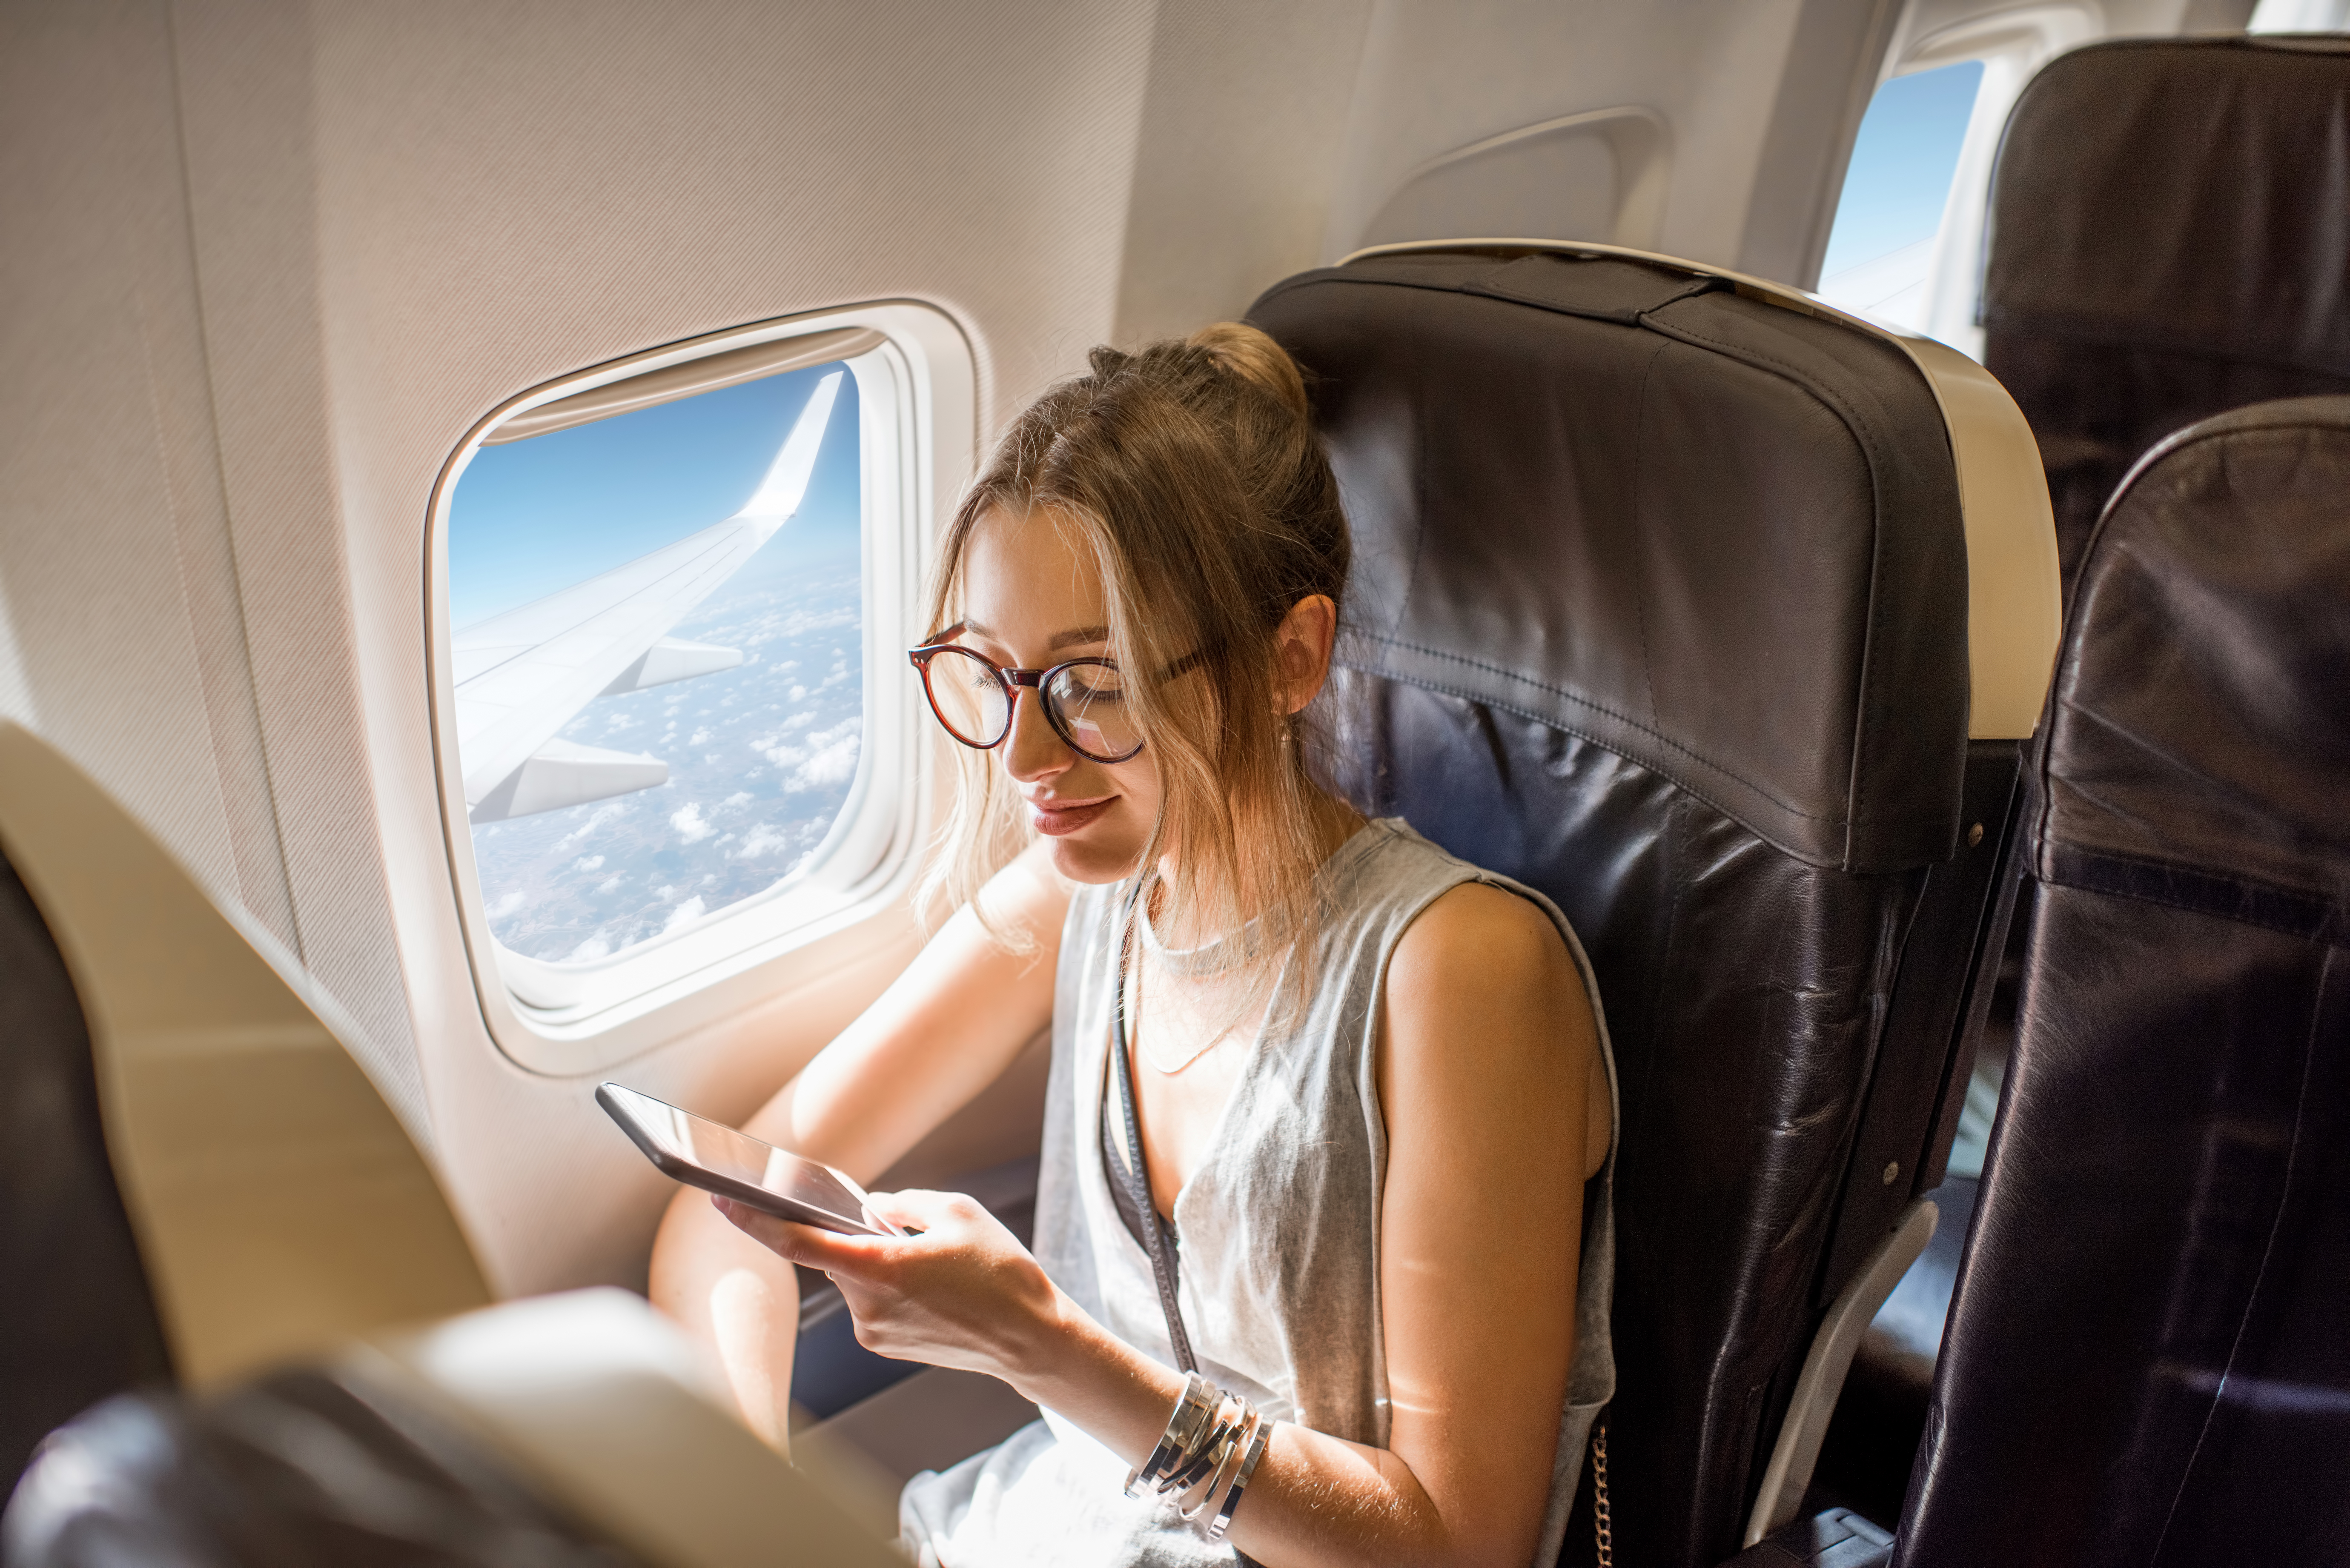 A woman on the phone while on the plane | Source: Shutterstock